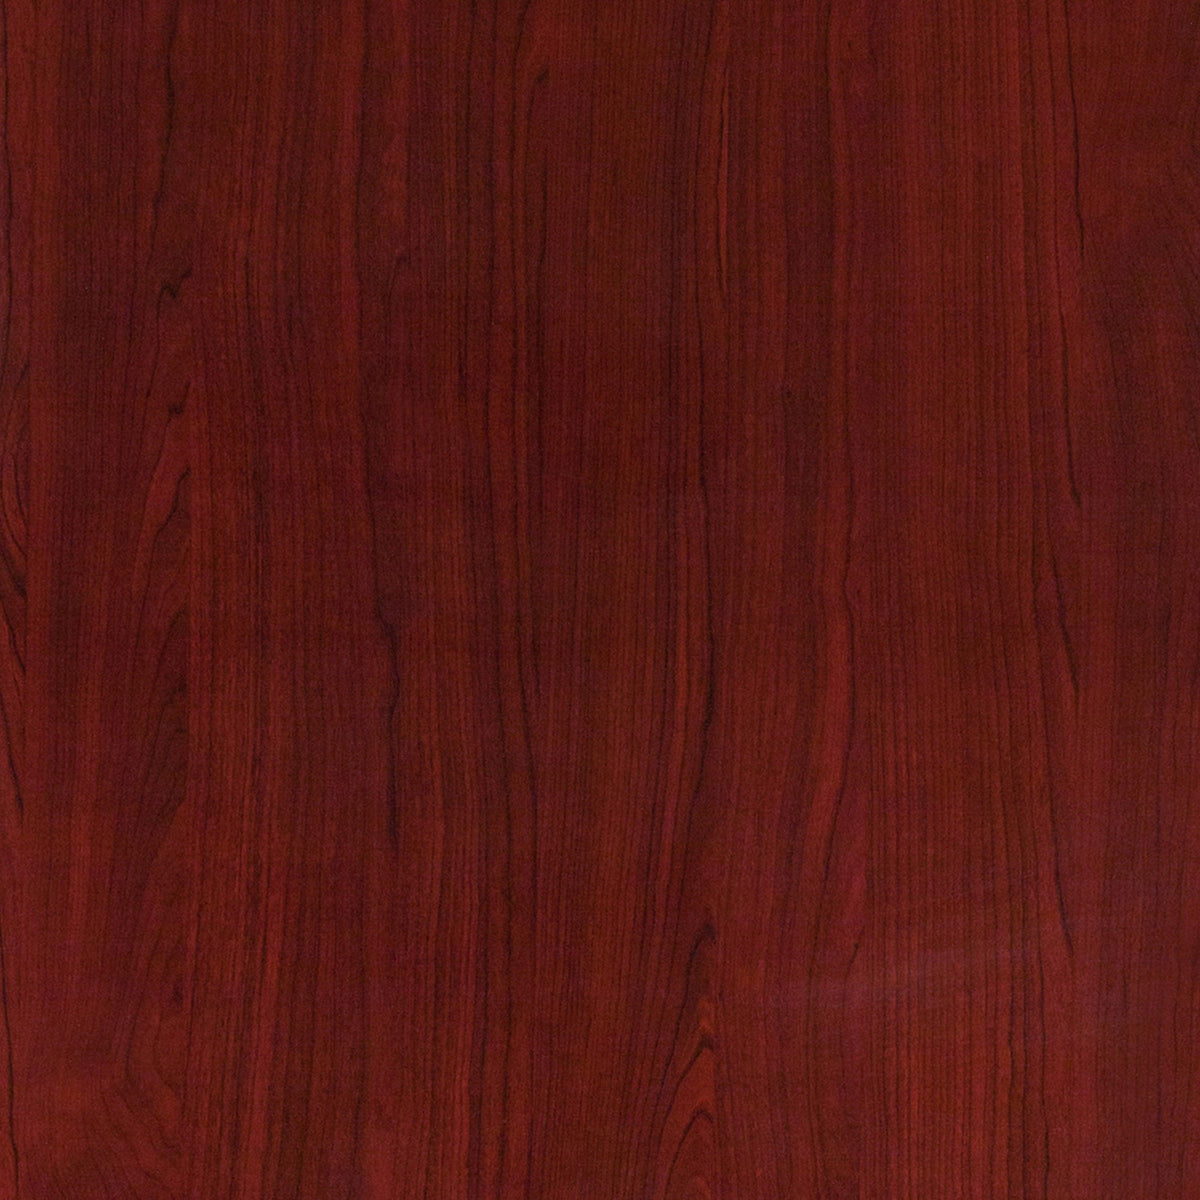 Mahogany |#| 30inch x 60inch Rectangular High-Gloss Mahogany Resin Table Top with 2inch Thick Edge